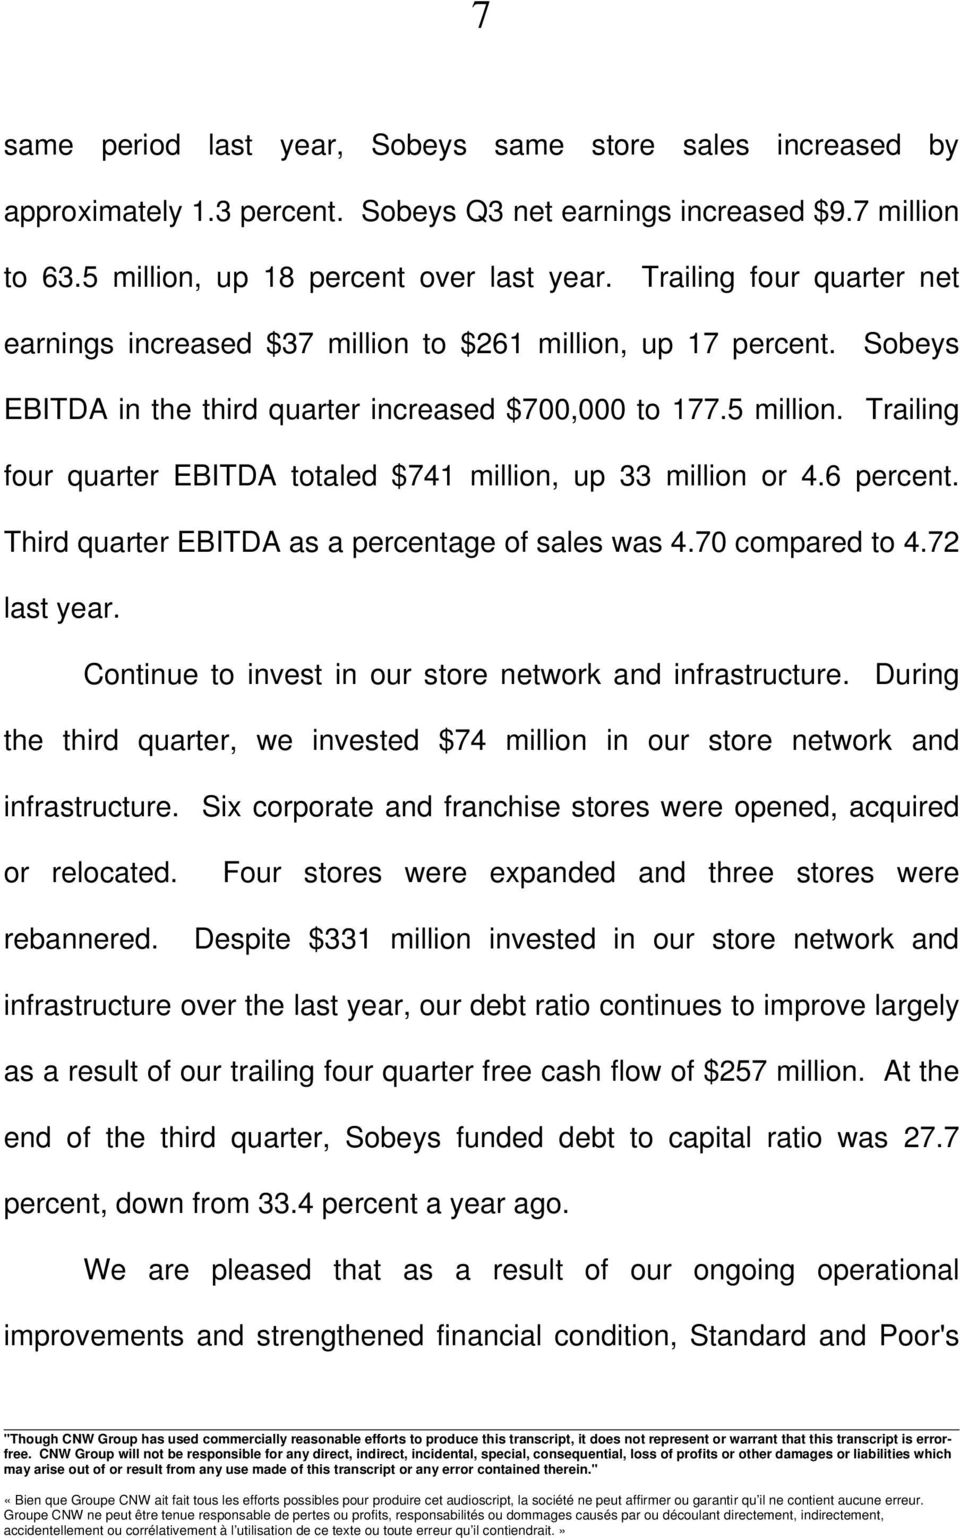 Trailing four quarter EBITDA totaled $741 million, up 33 million or 4.6 percent. Third quarter EBITDA as a percentage of sales was 4.70 compared to 4.72 last year.